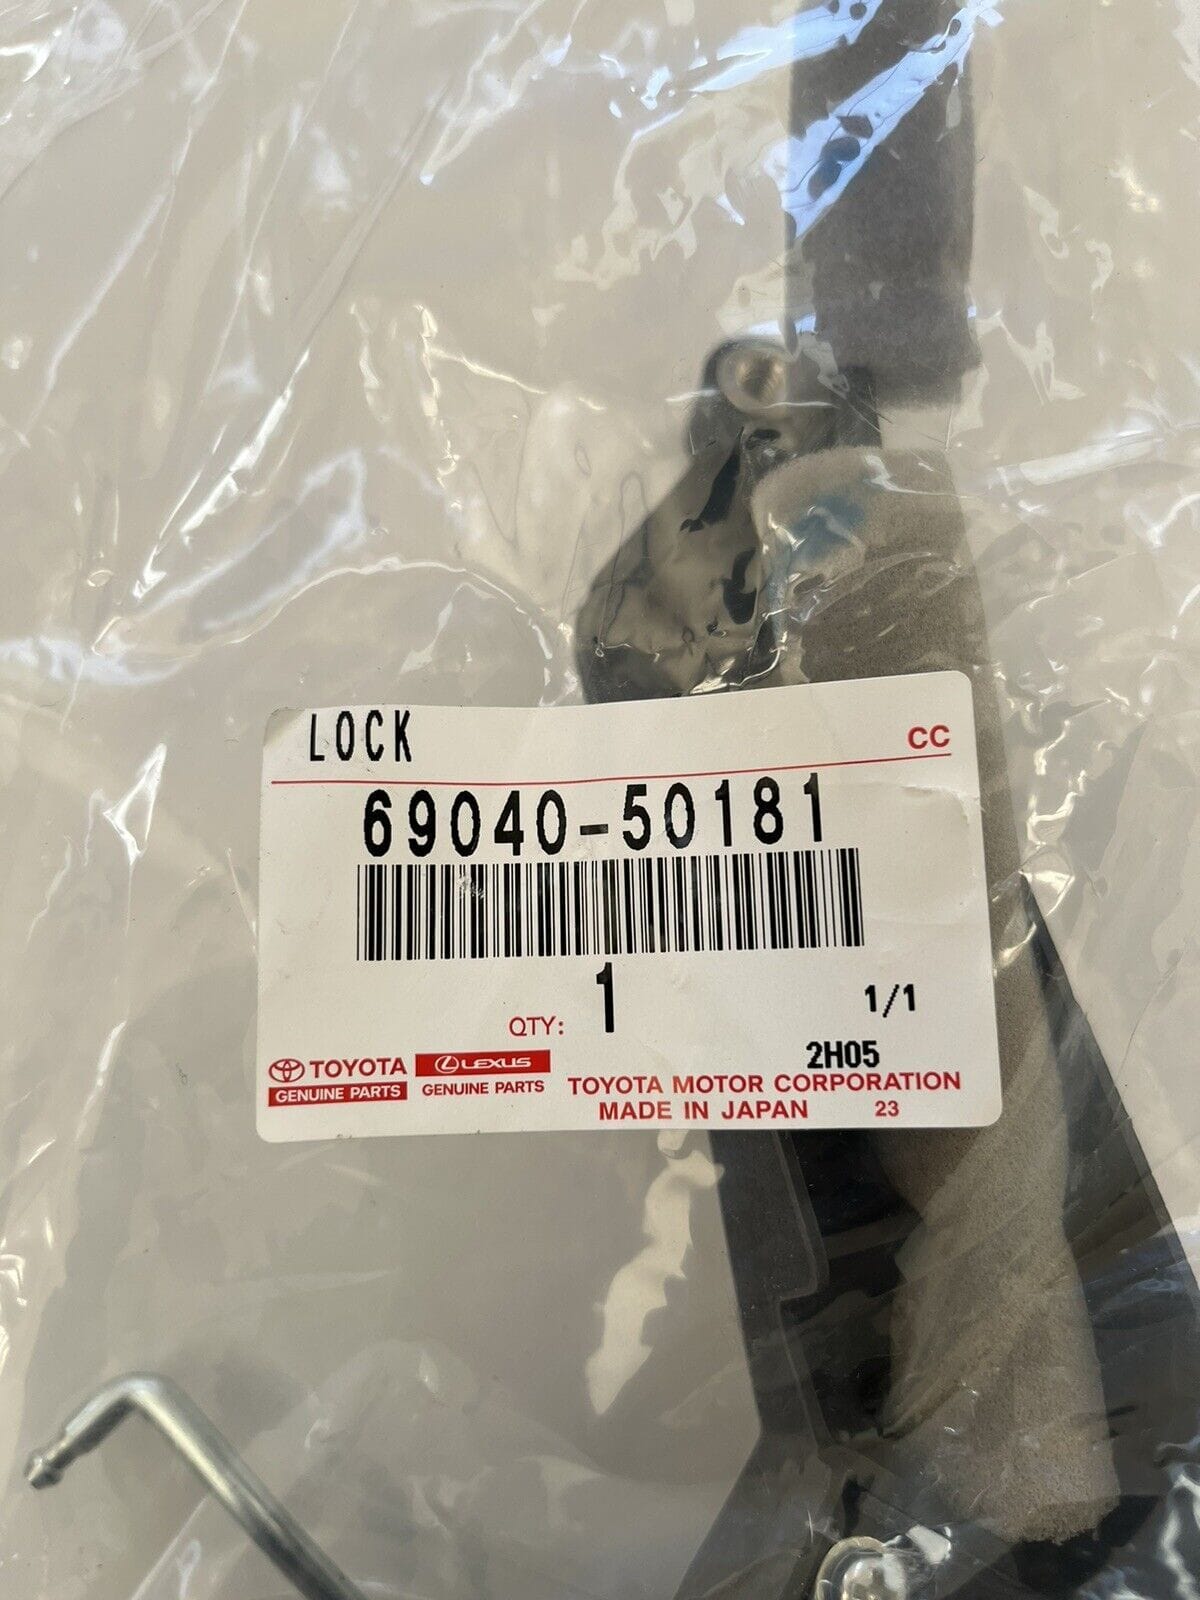 Interior/Upholstery - LS430 Door lock actuators for front Passenger and Driver side - New - Dover, DE 19901, United States